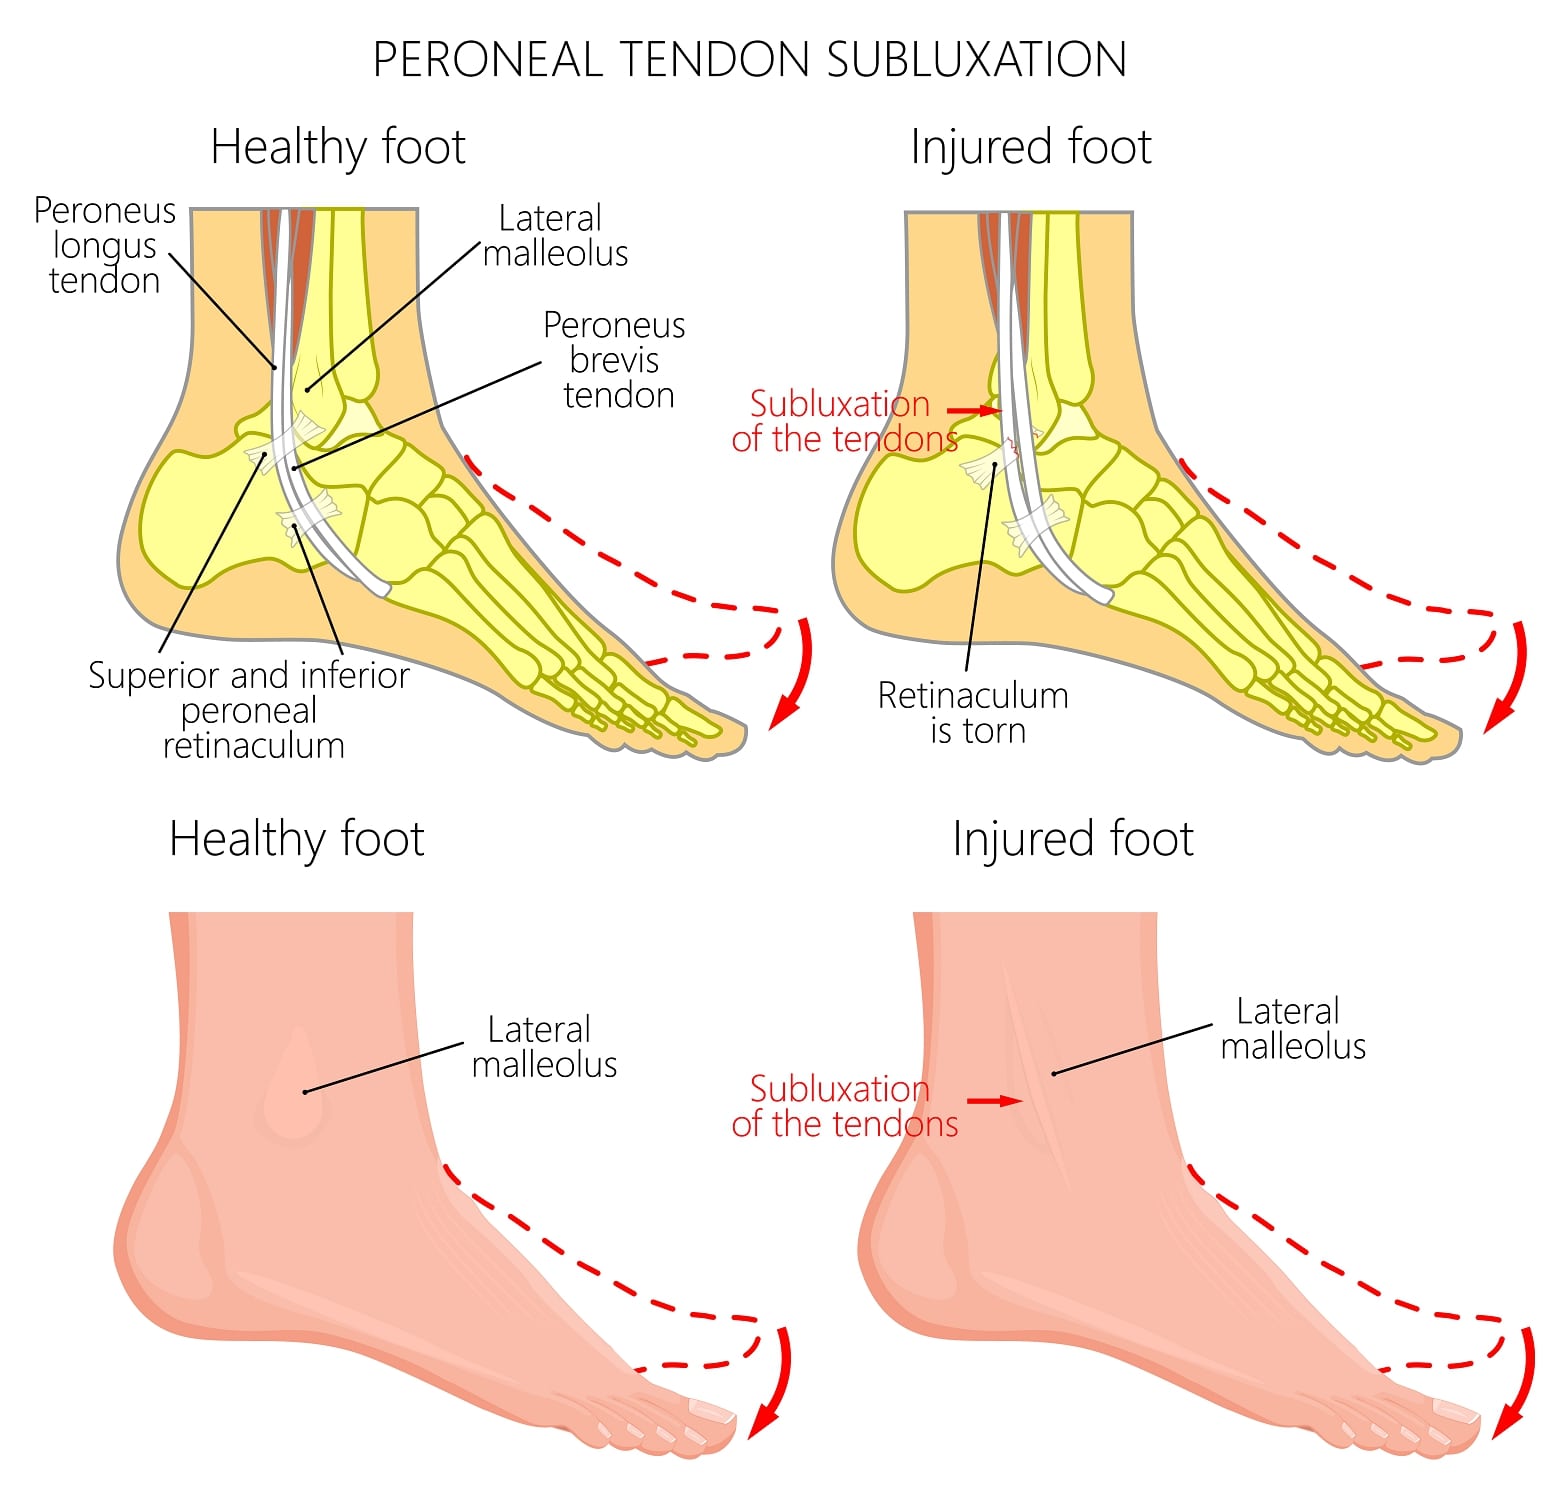 Posterior tibial tendon insufficiency